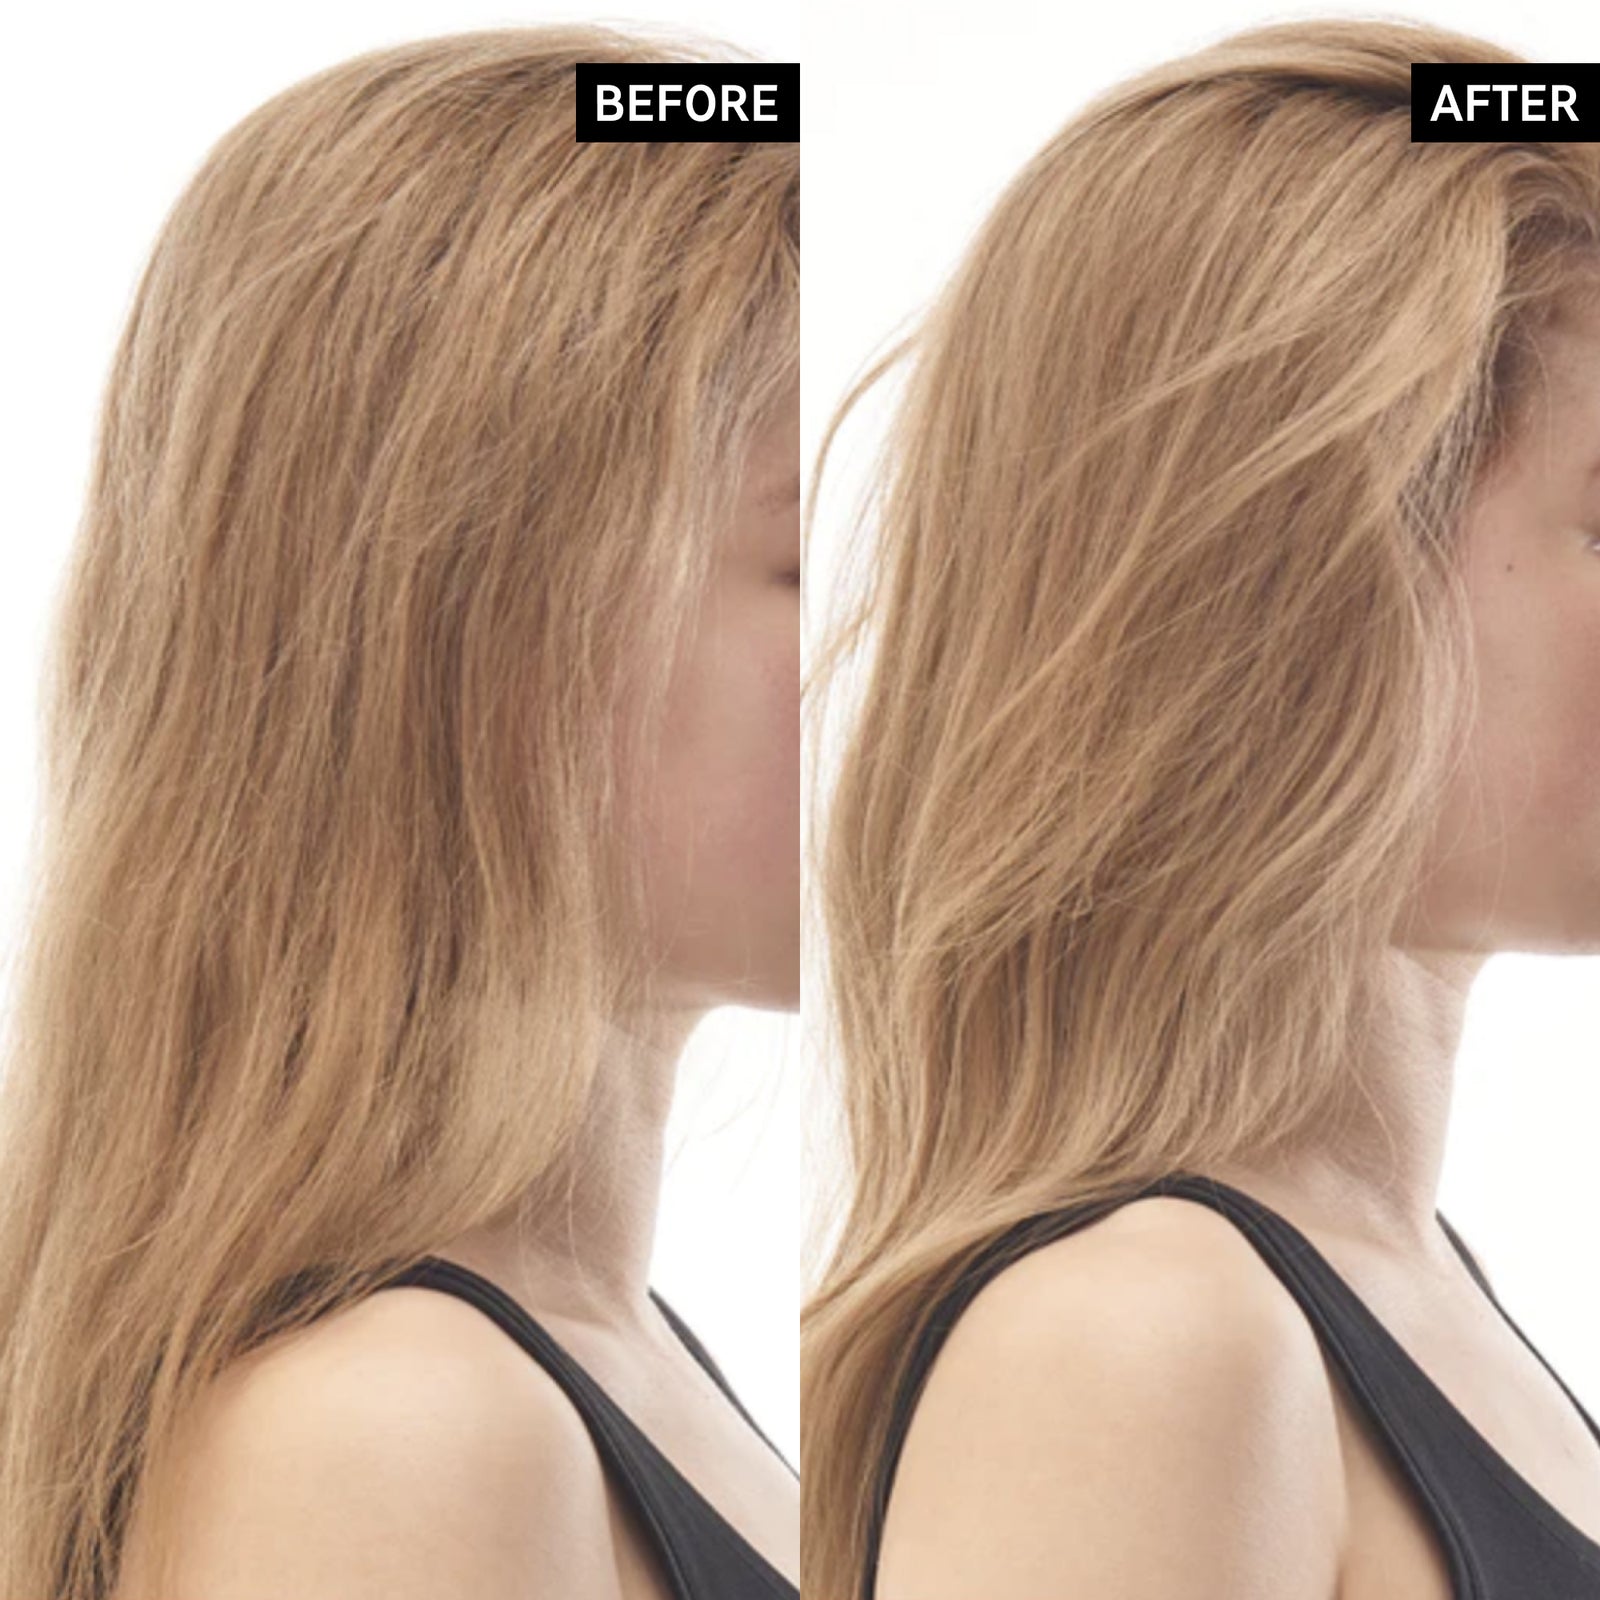 Before and after of using PCA Bond Repair Hair Treatment